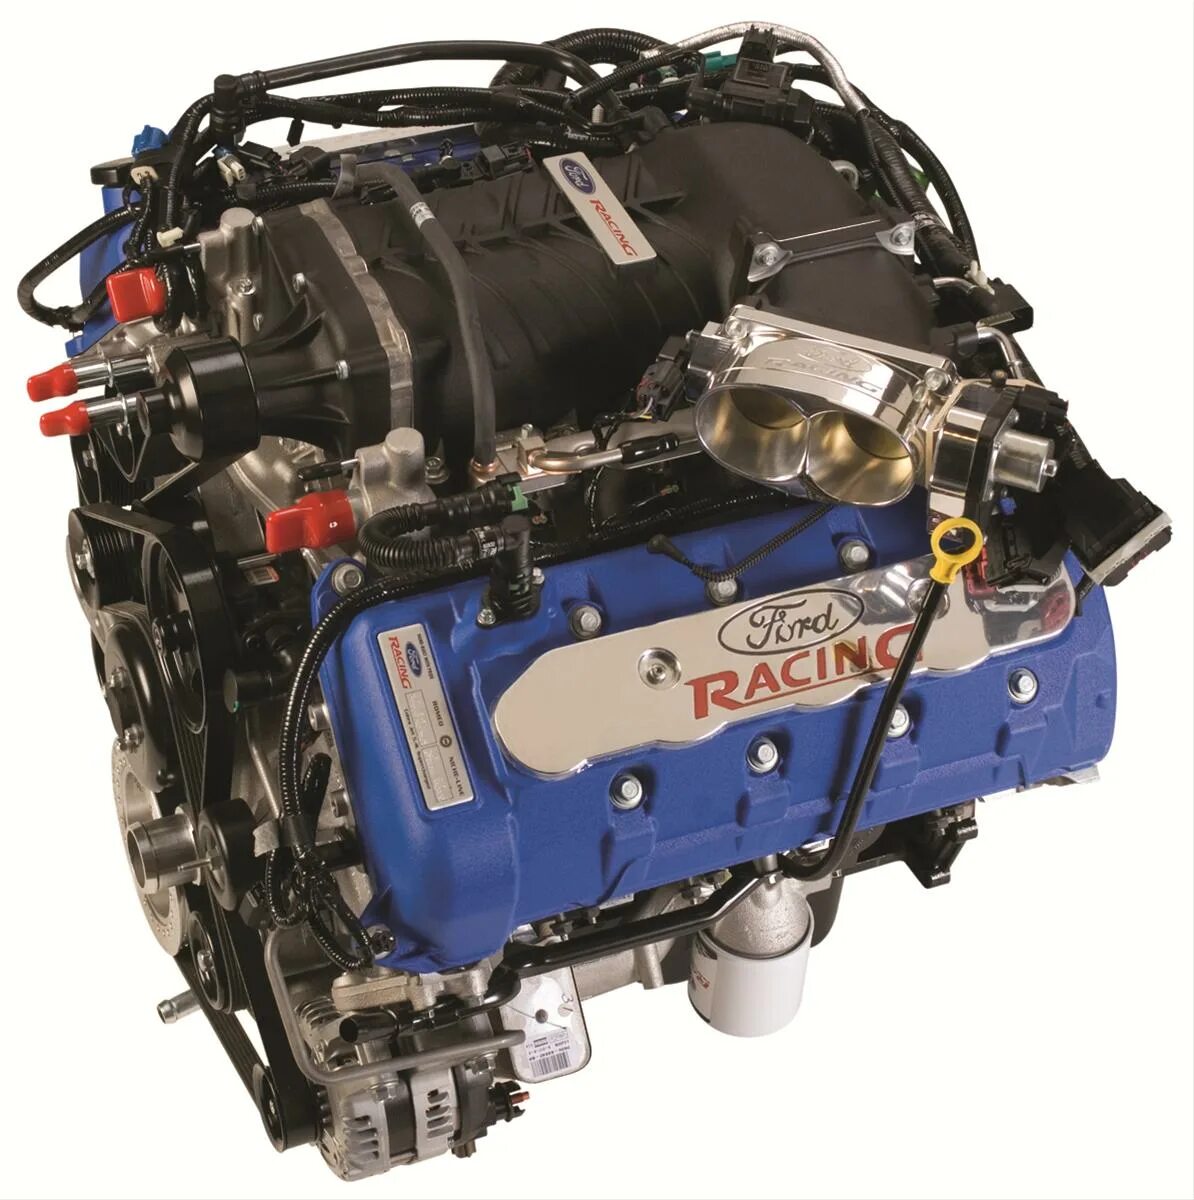 Ford 380 Motor. Switzer Ford Racing двигатель. Ford Performance движок. Ford Racing Performance Part.